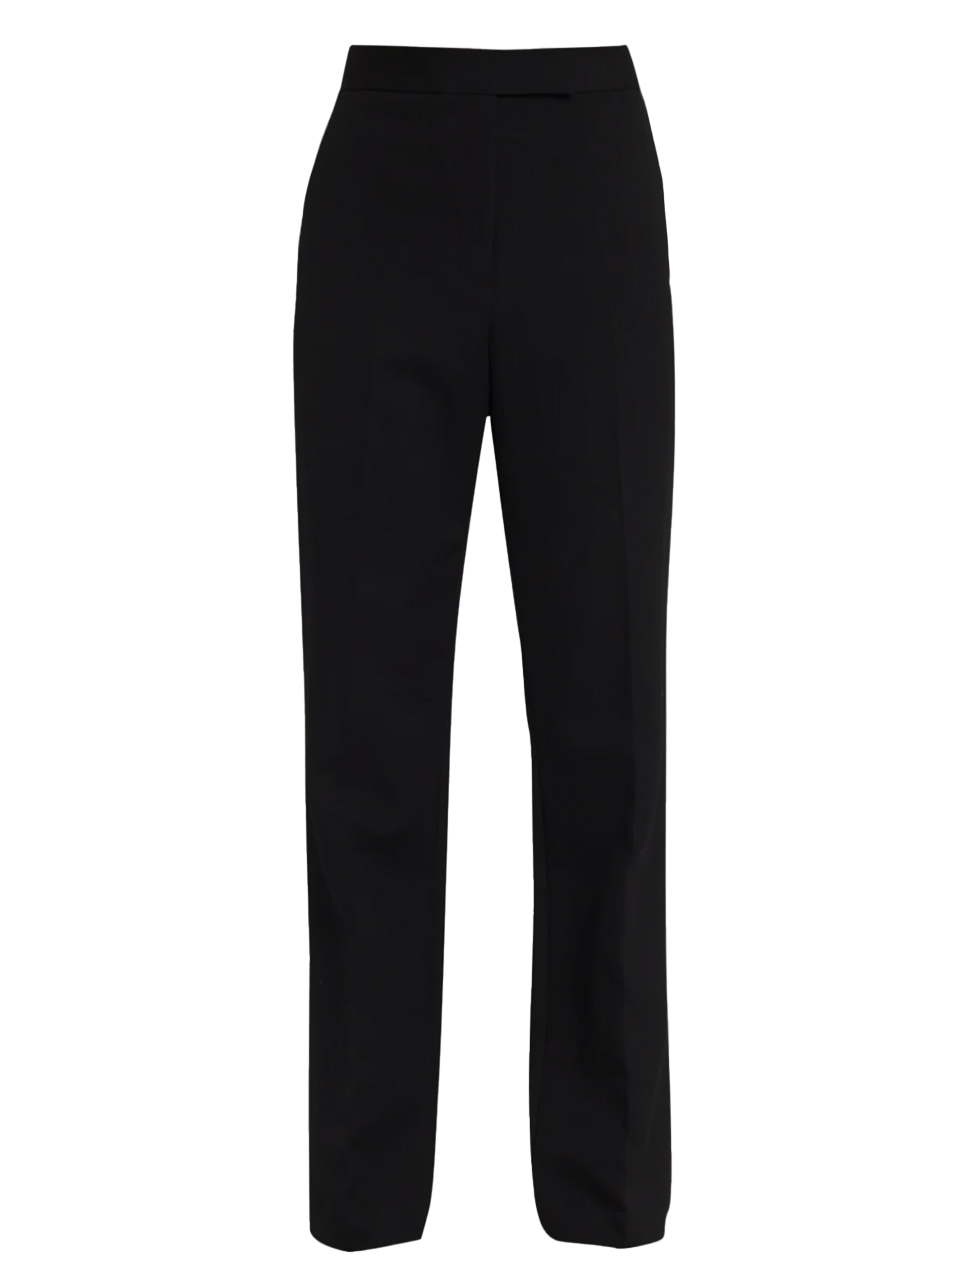 3.1 Phillip Lim Relaxed Wool Tailored Pant in Black Product Shot 